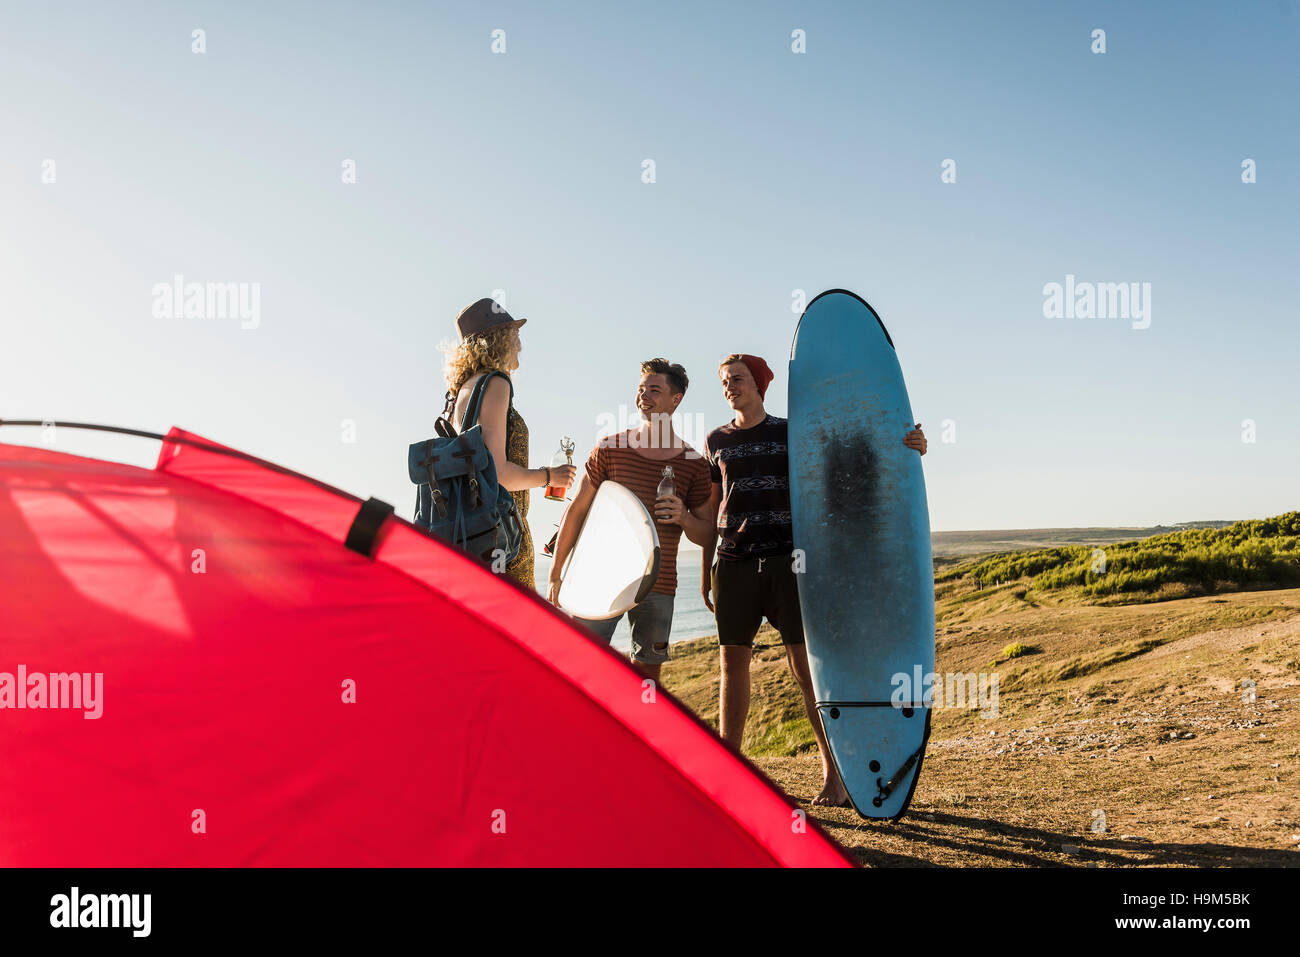 Three friends with surfboards camping at seaside Stock Photo